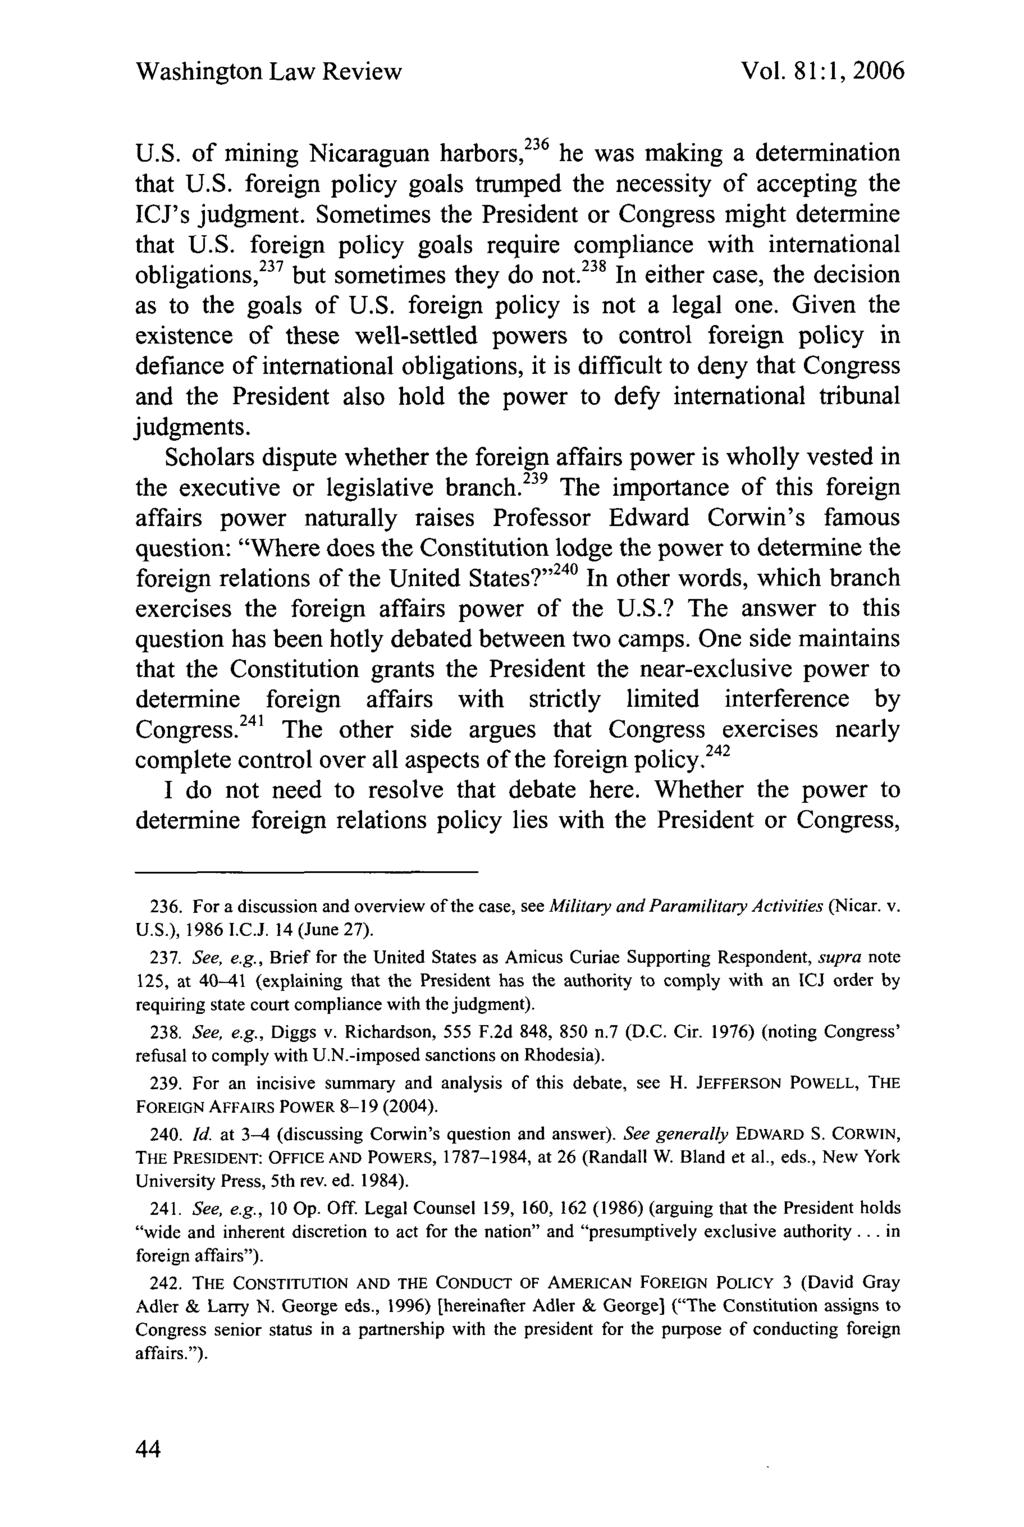 Washington Law Review Vol. 81:1, 2006 U.S. of mining Nicaraguan harbors, 236 he was making a determination that U.S. foreign policy goals trumped the necessity of accepting the ICJ's judgment.